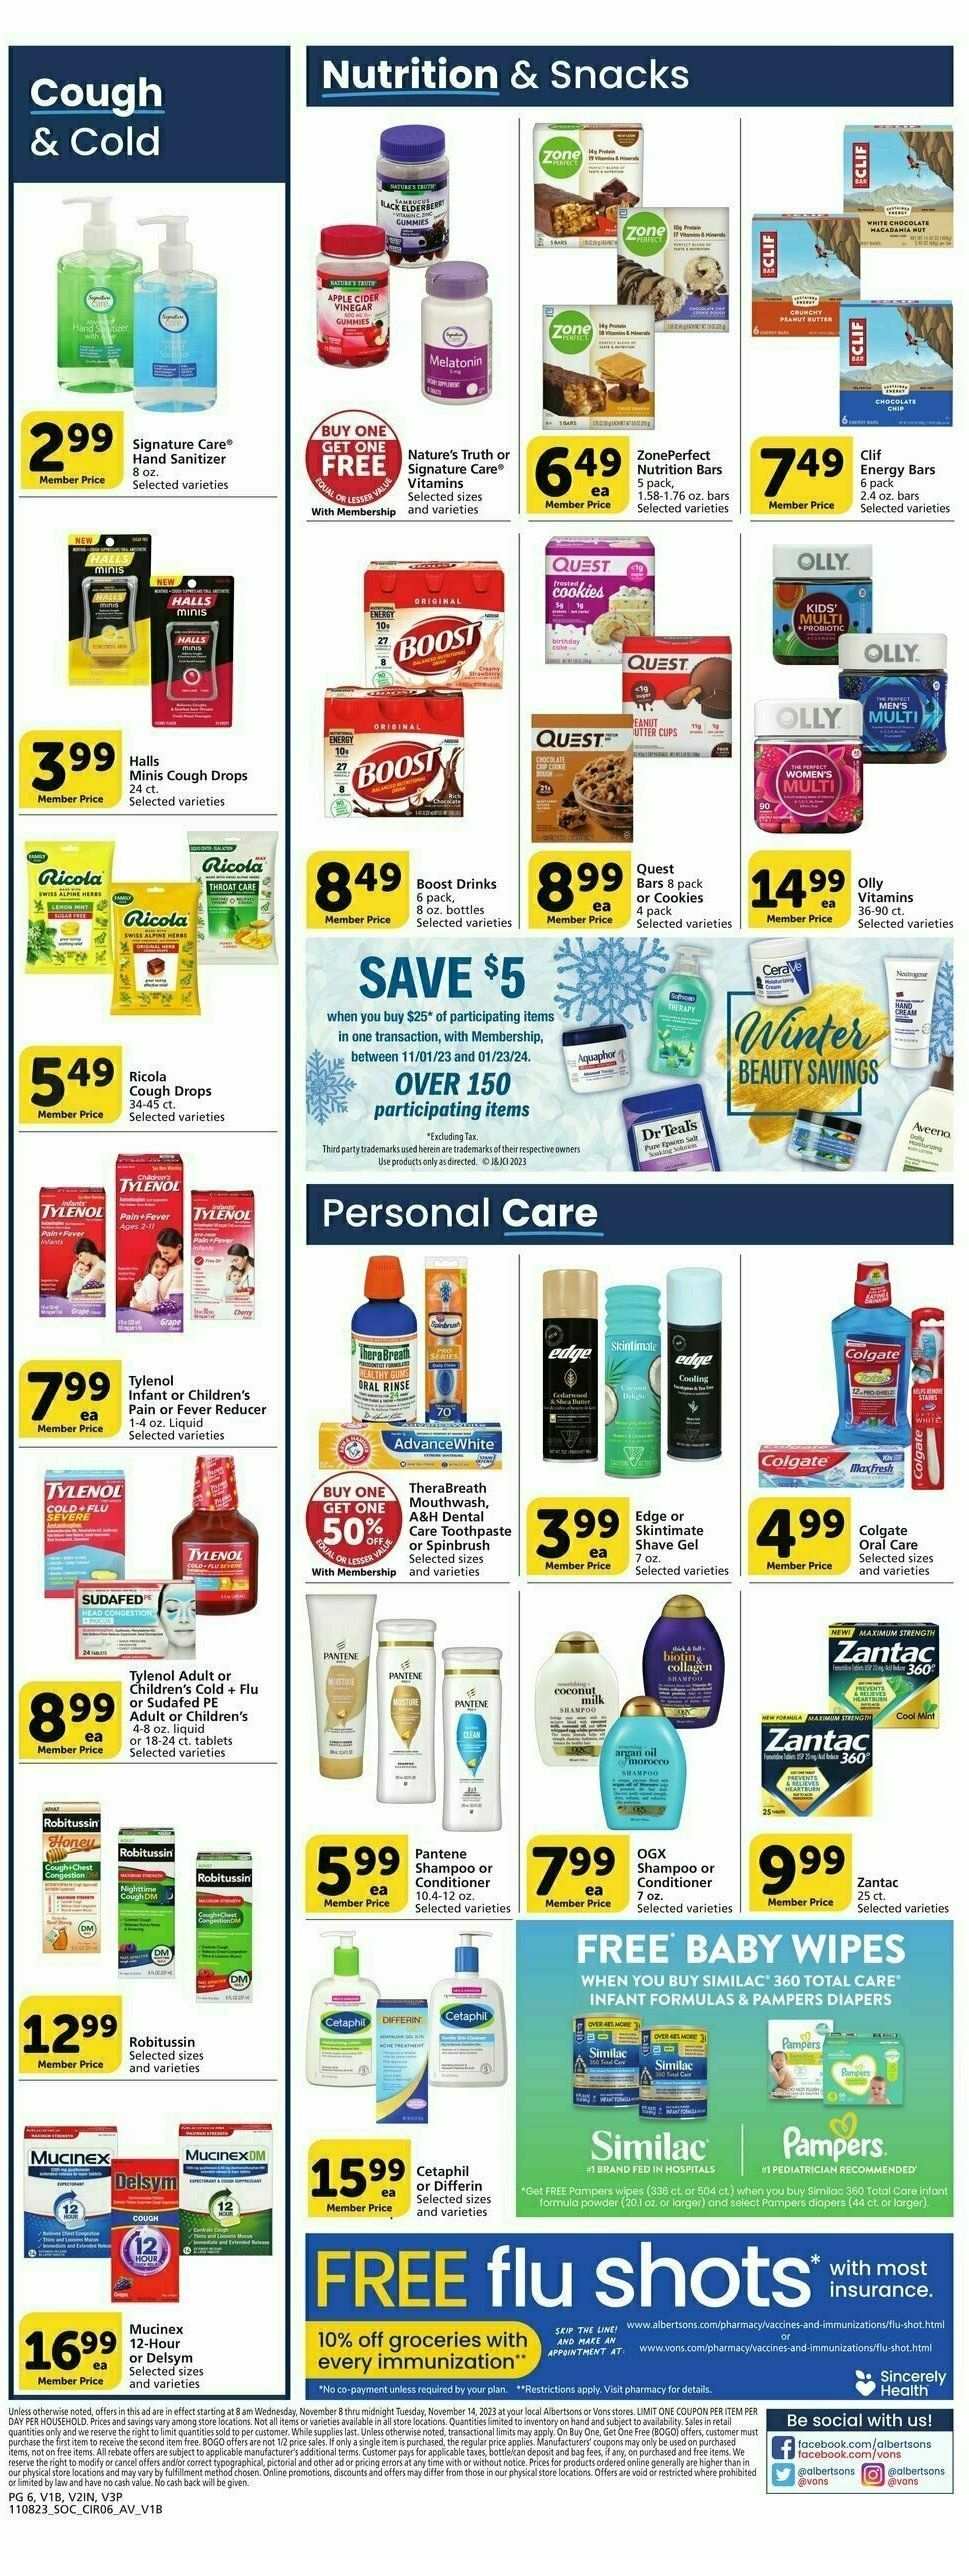 Vons Weekly Ad from November 8